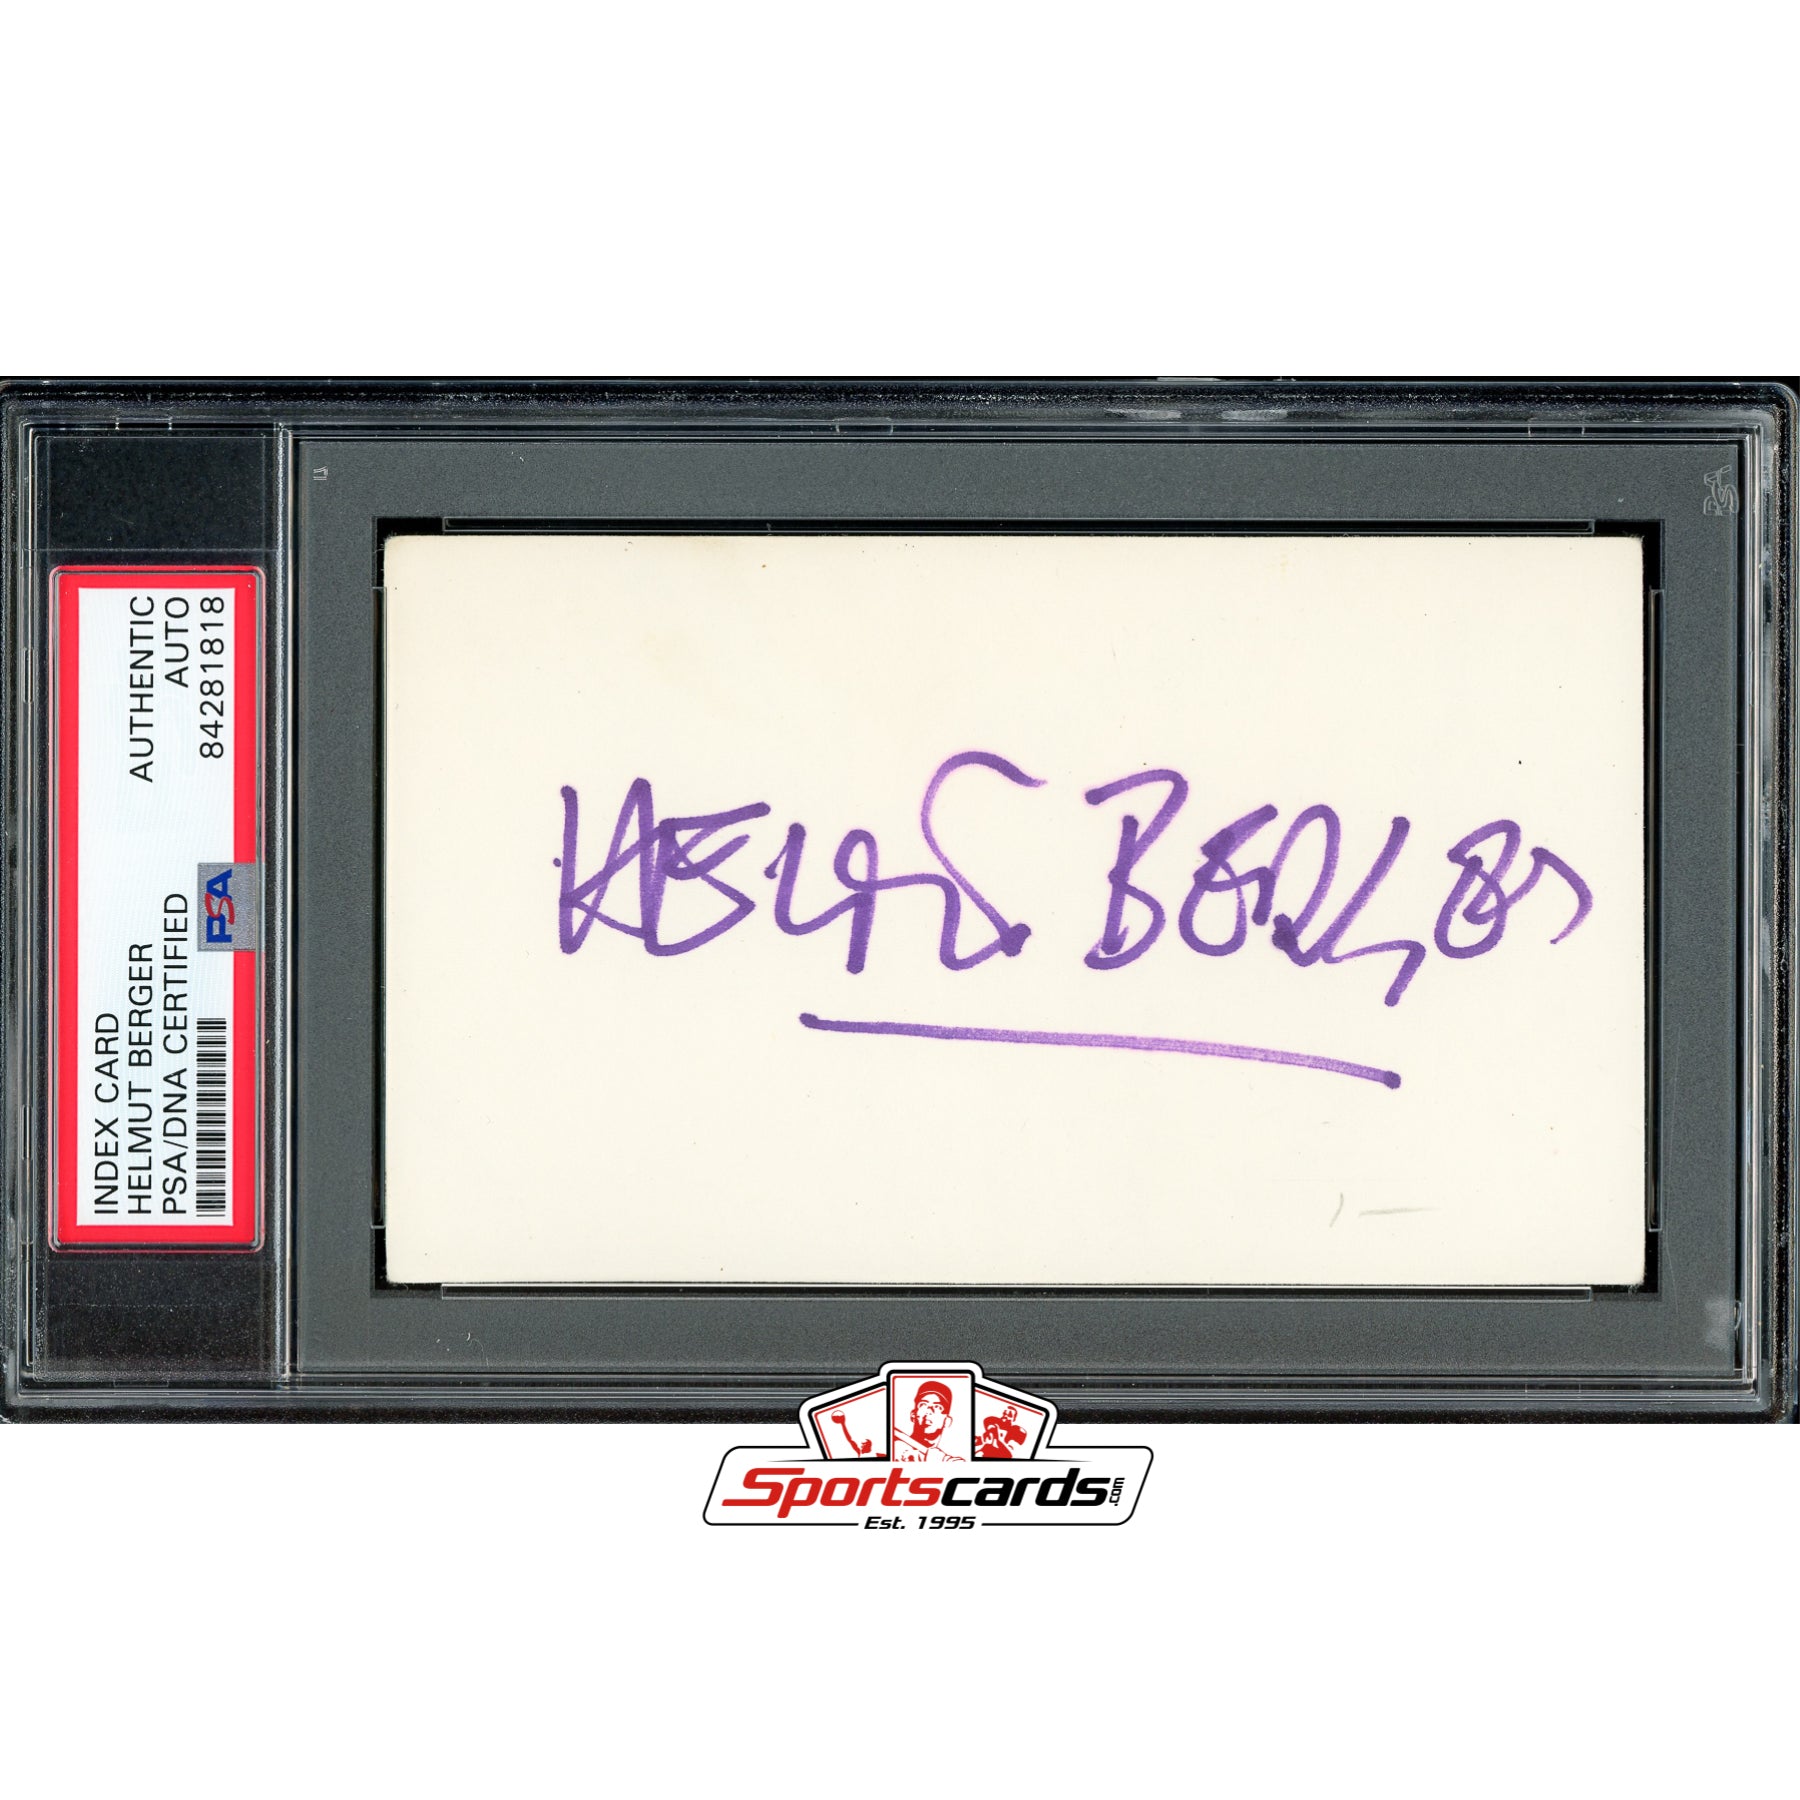 Helmut Berger Signed 3x5 Index Card Autograph PSA/DNA Godfather III Actor